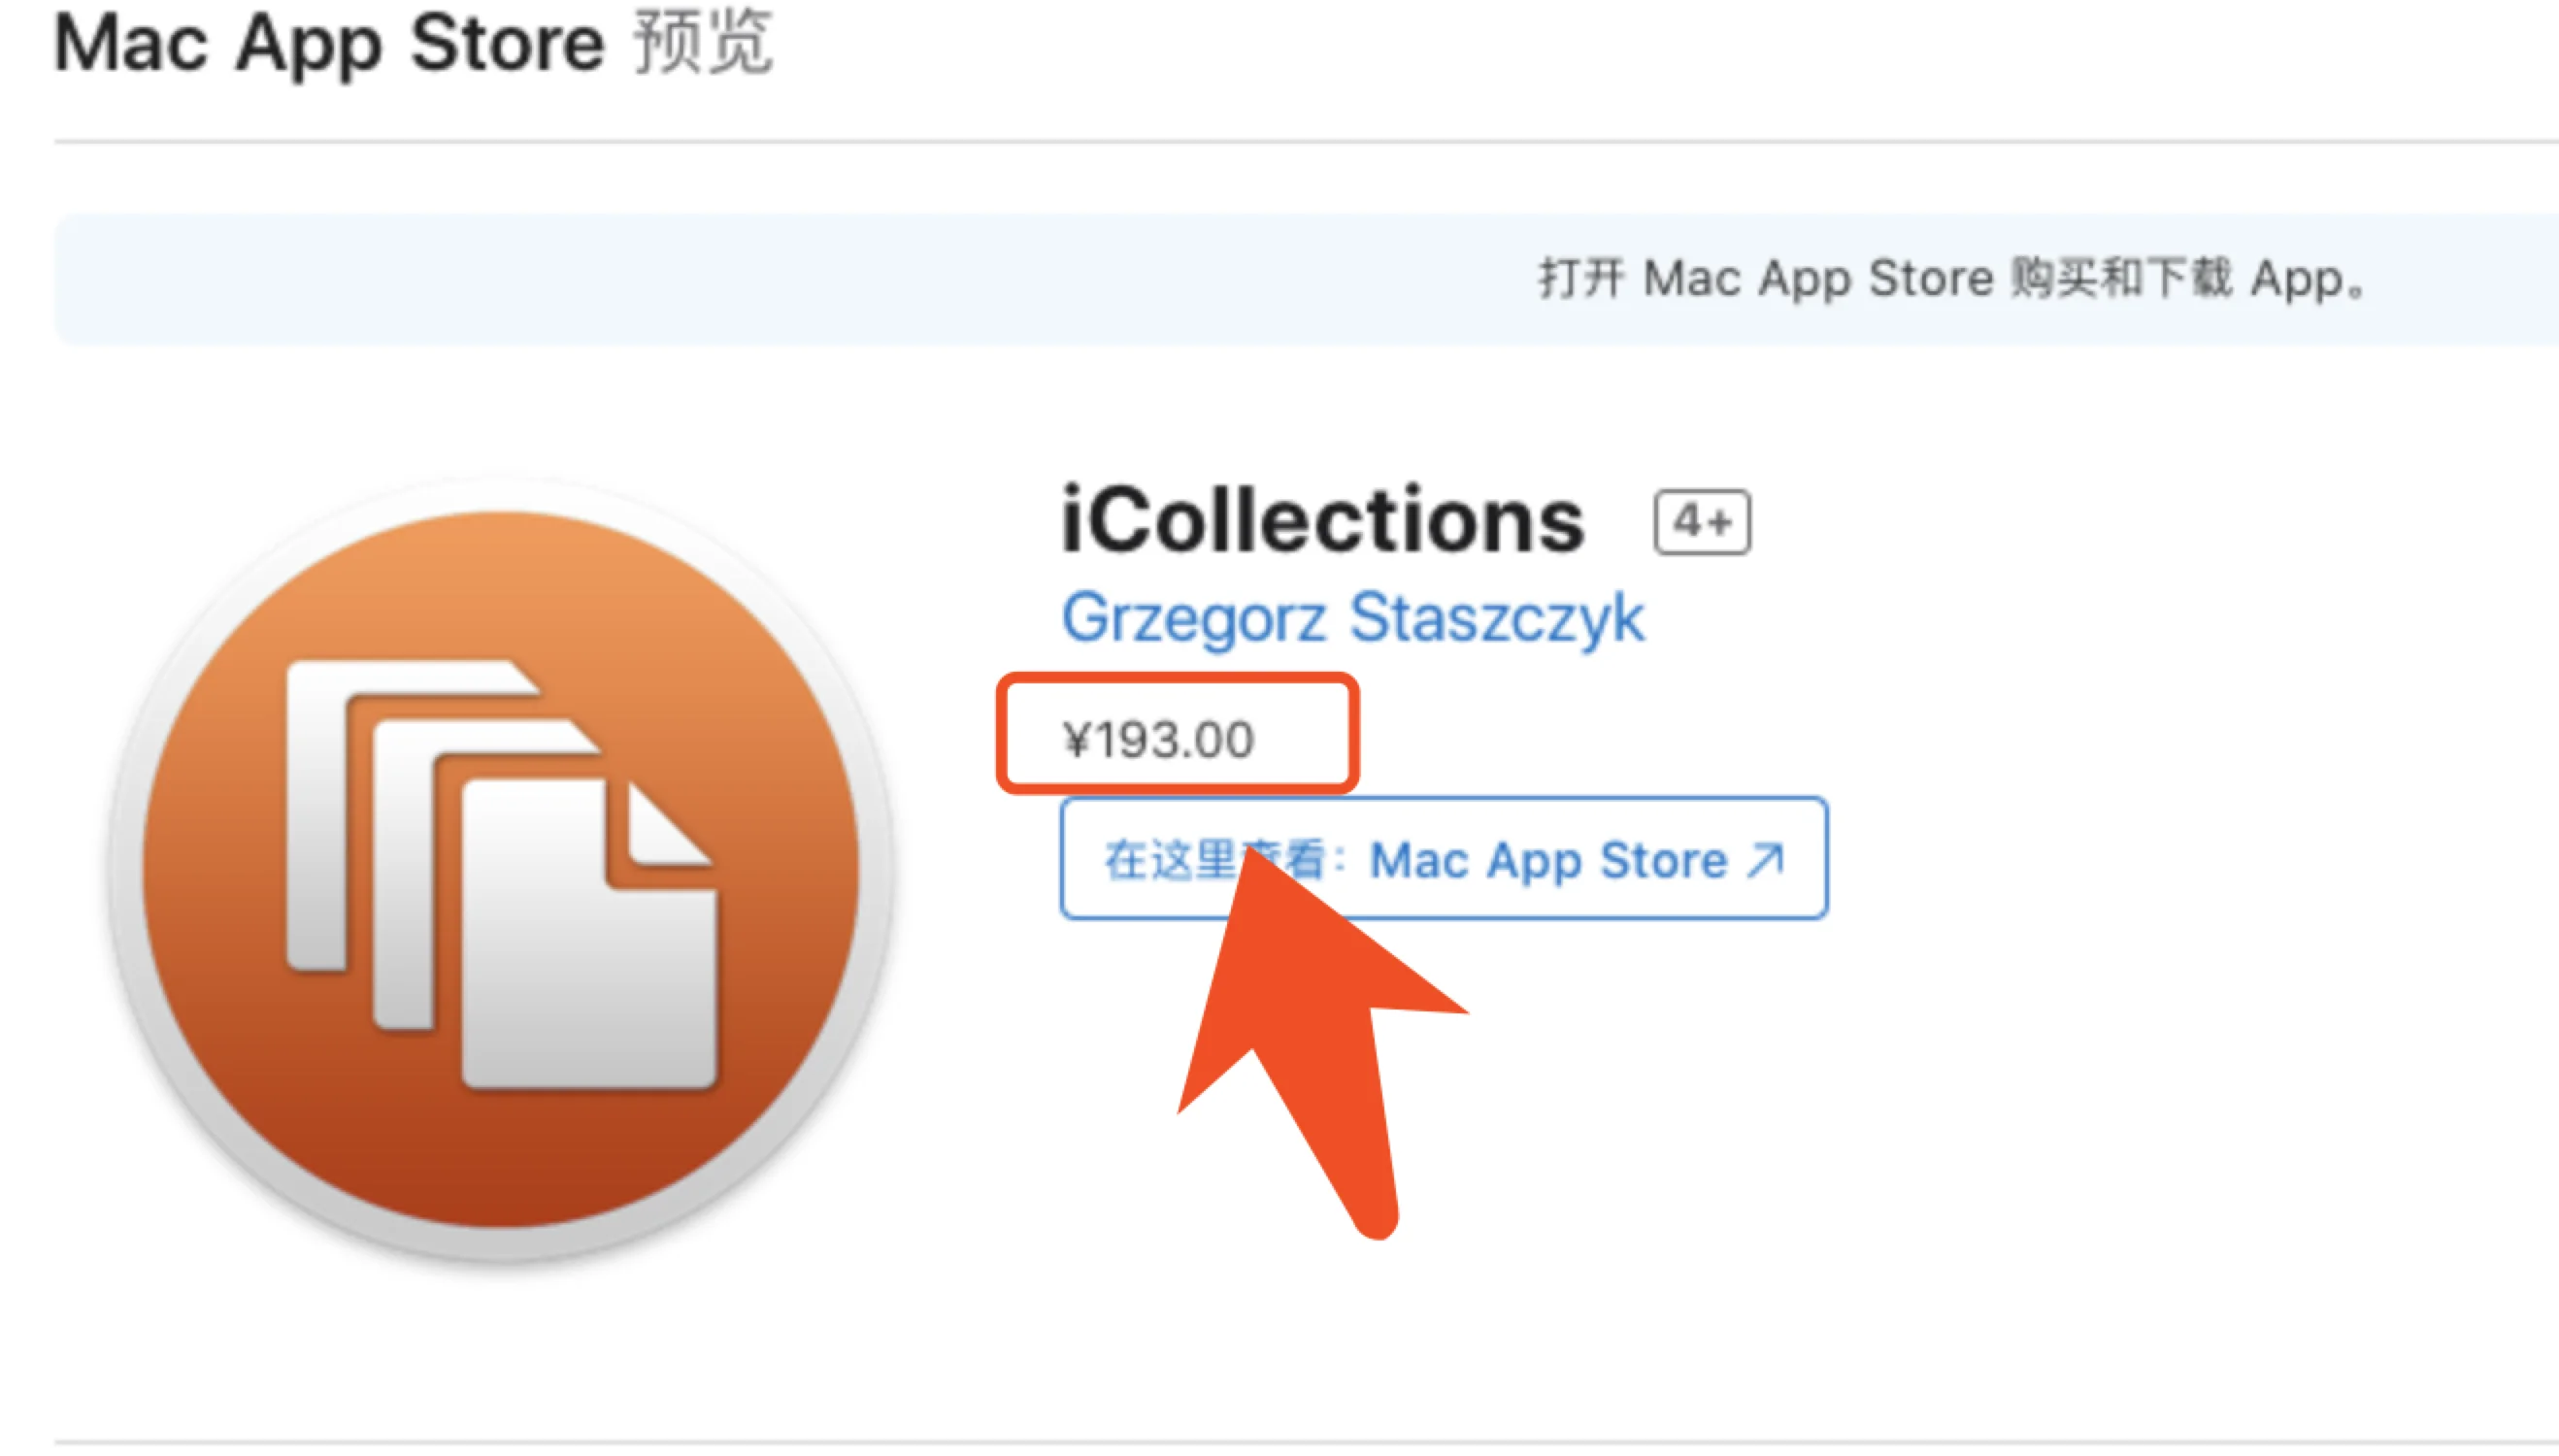 iCollections 6.4.1 (64104) 组织你的桌面图标-马克喵